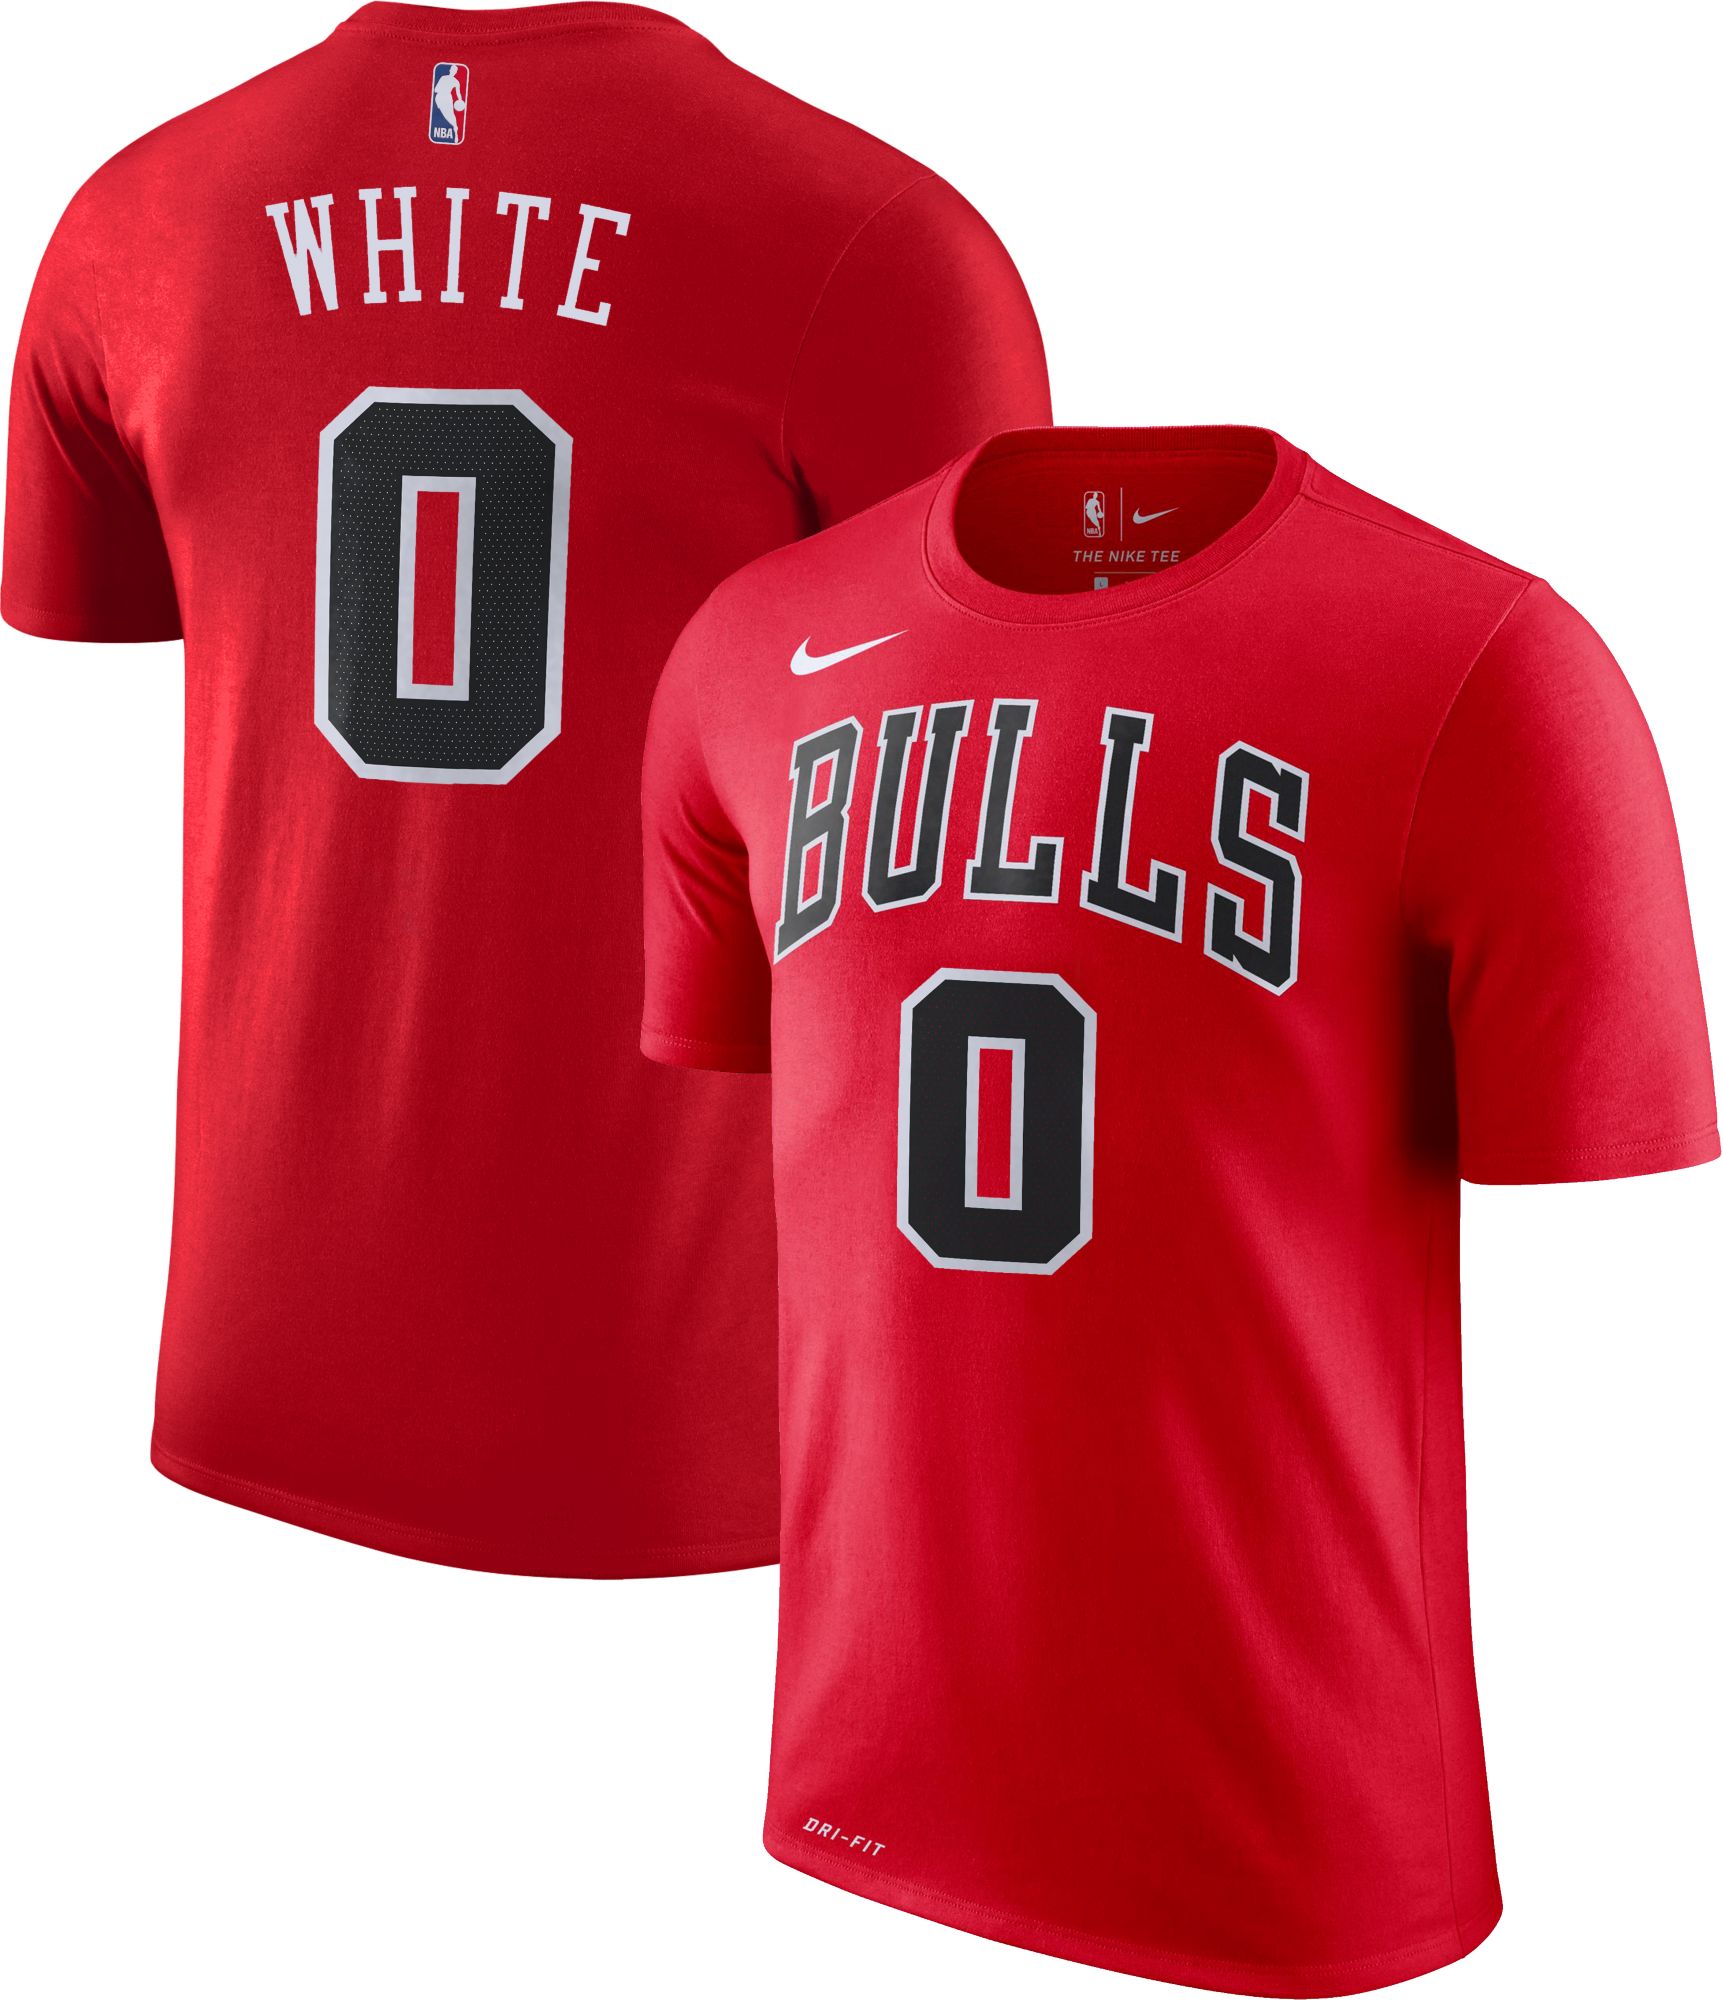 Coby White #0 Dri-FIT Red T-Shirt 